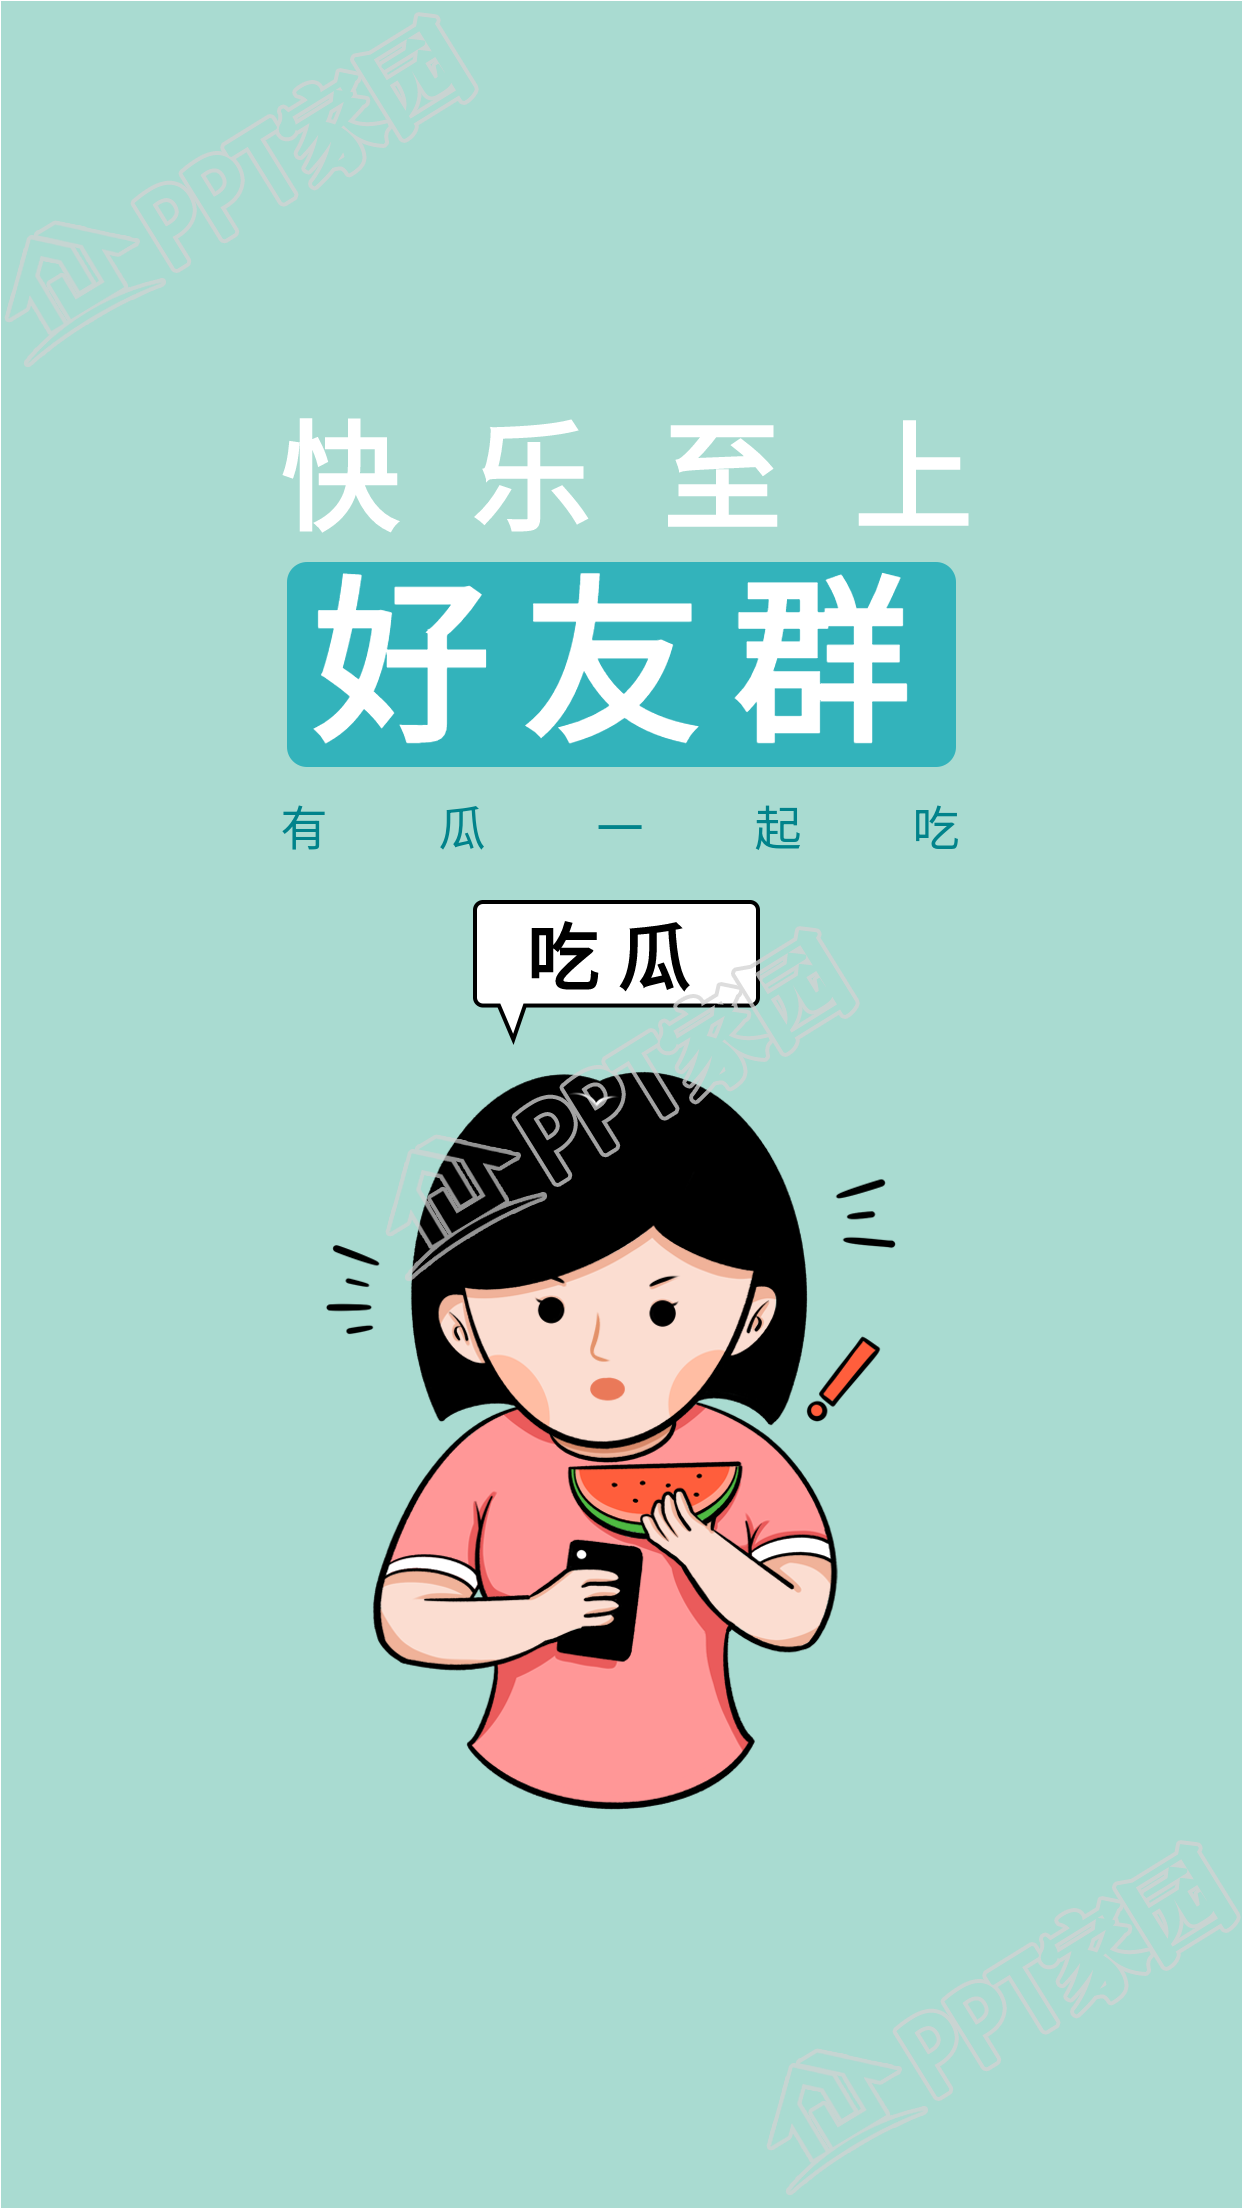 Girls friend group wechat group network eating melon wallpaper material download recommended